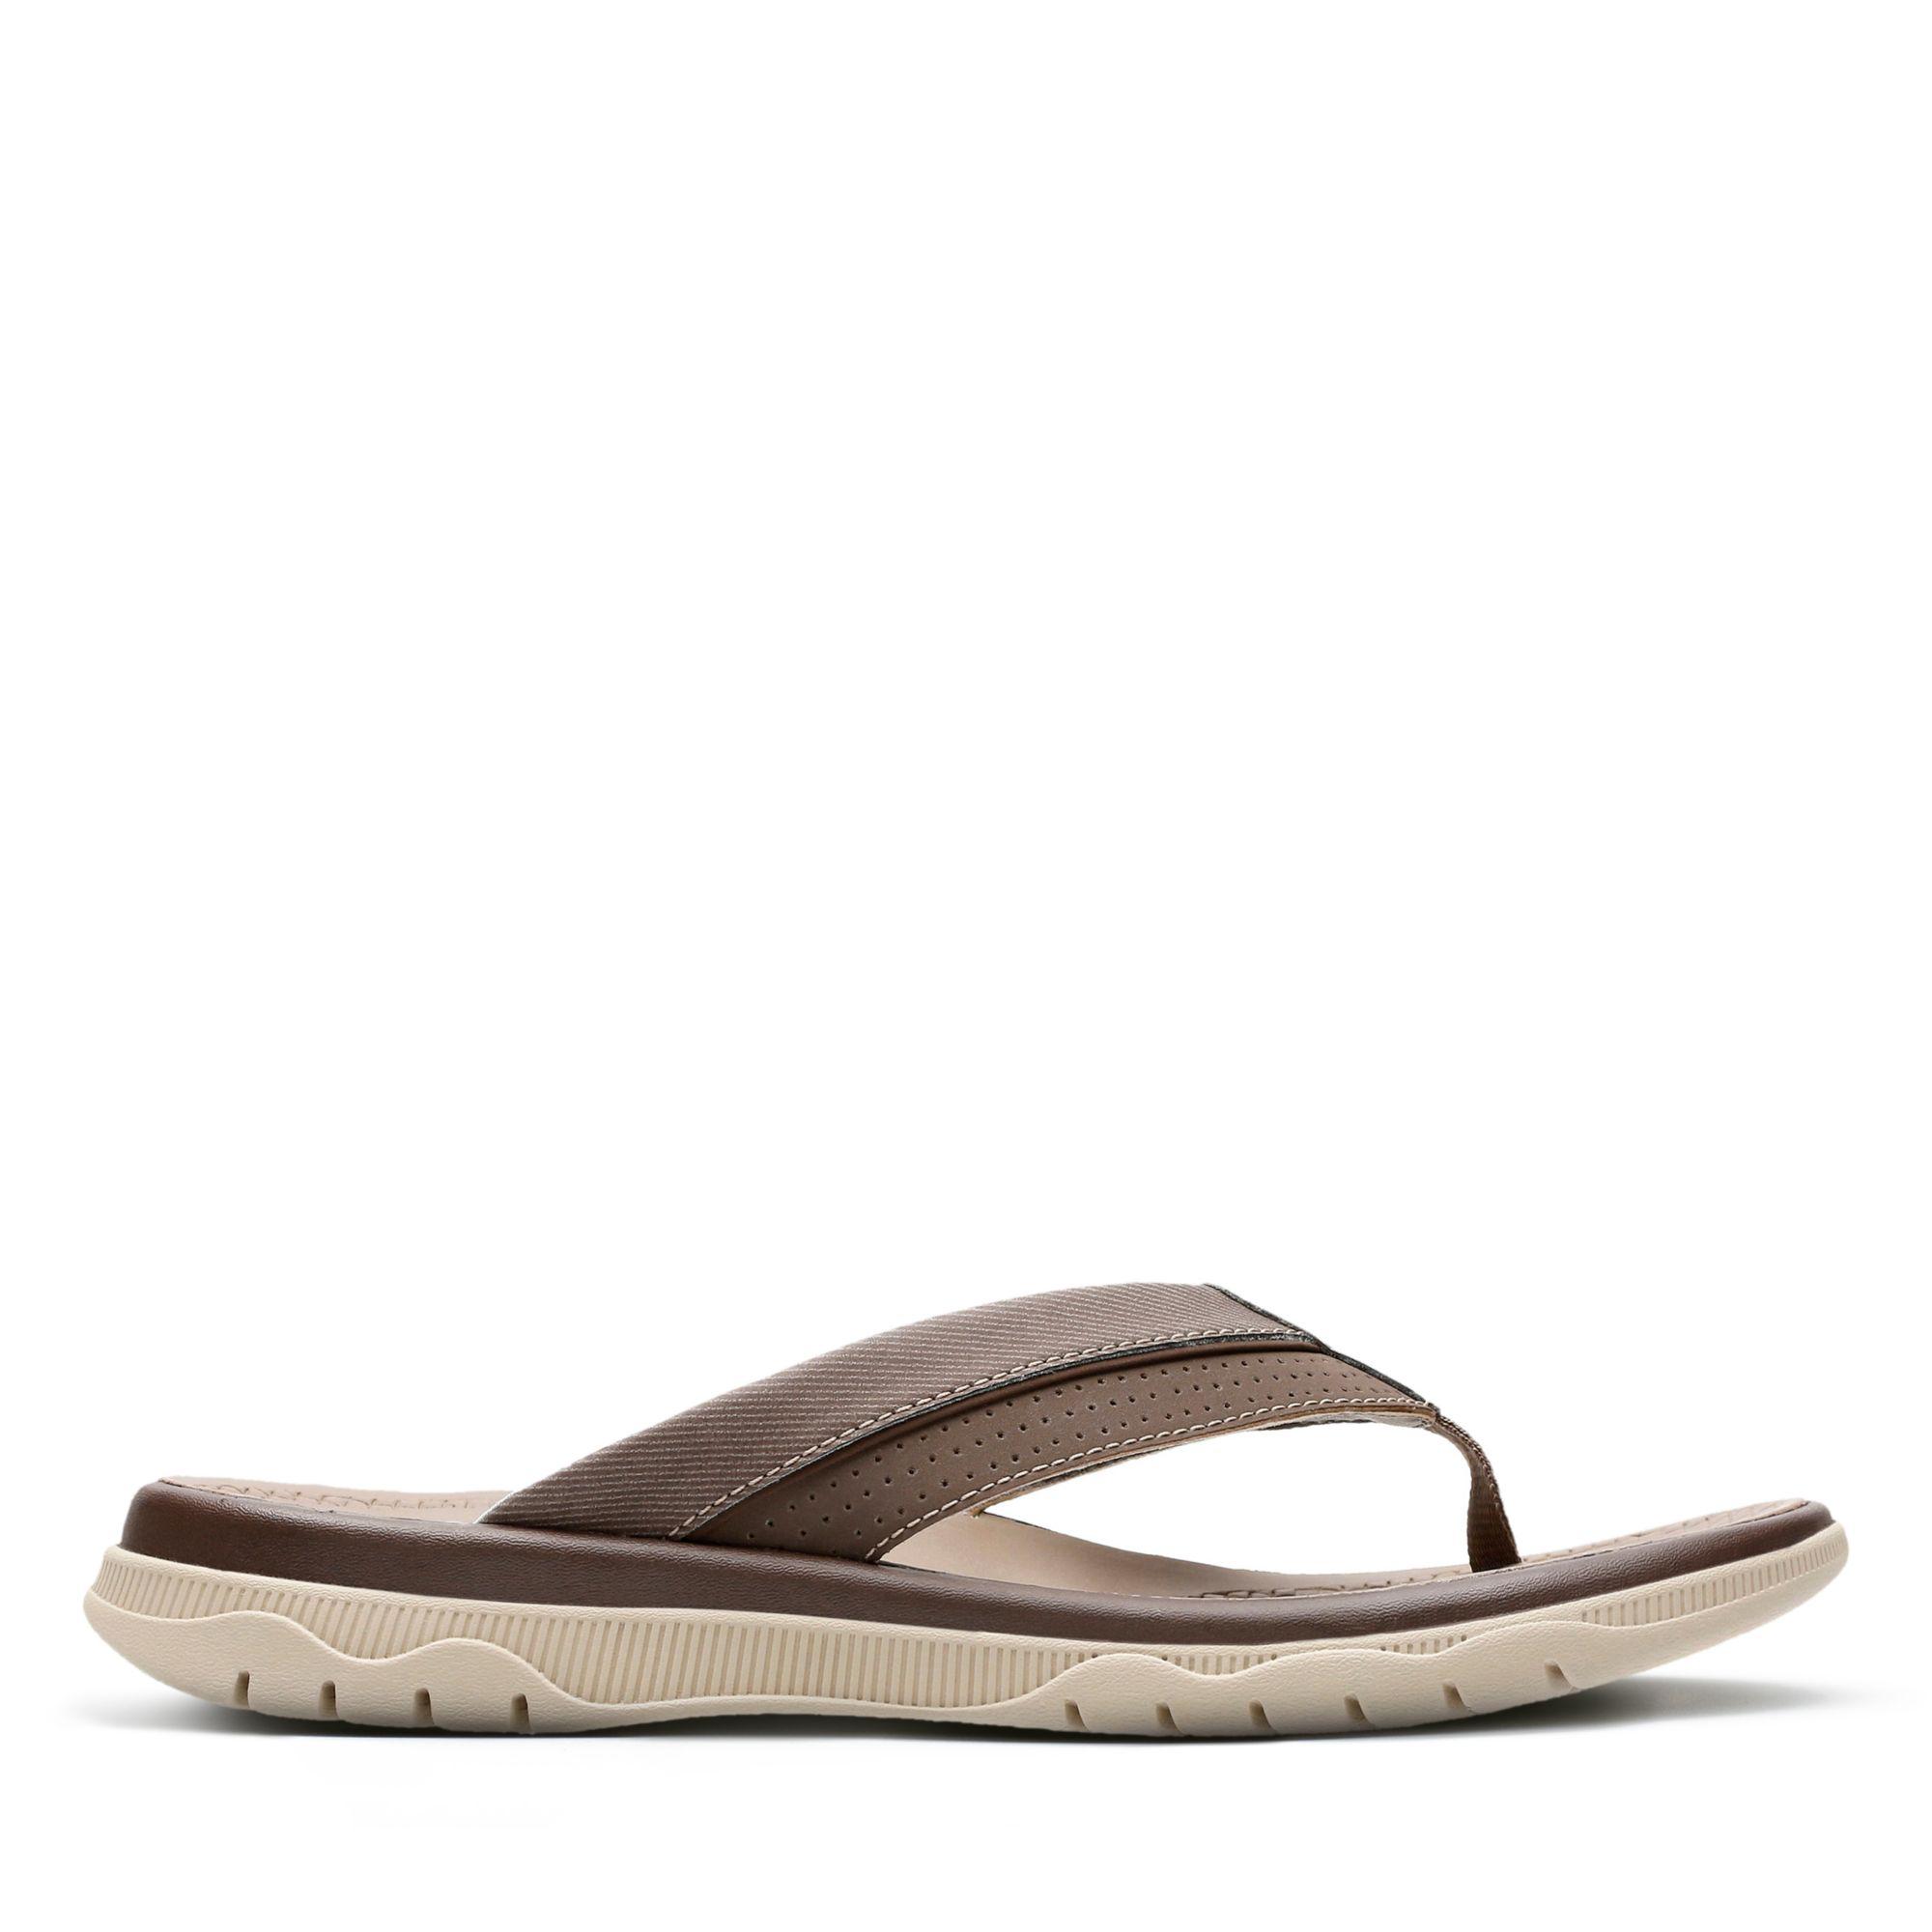 Clarks Synthetic Balta Sun Cloudsteppers Sandals in Dark Brown (Brown) for  Men - Lyst